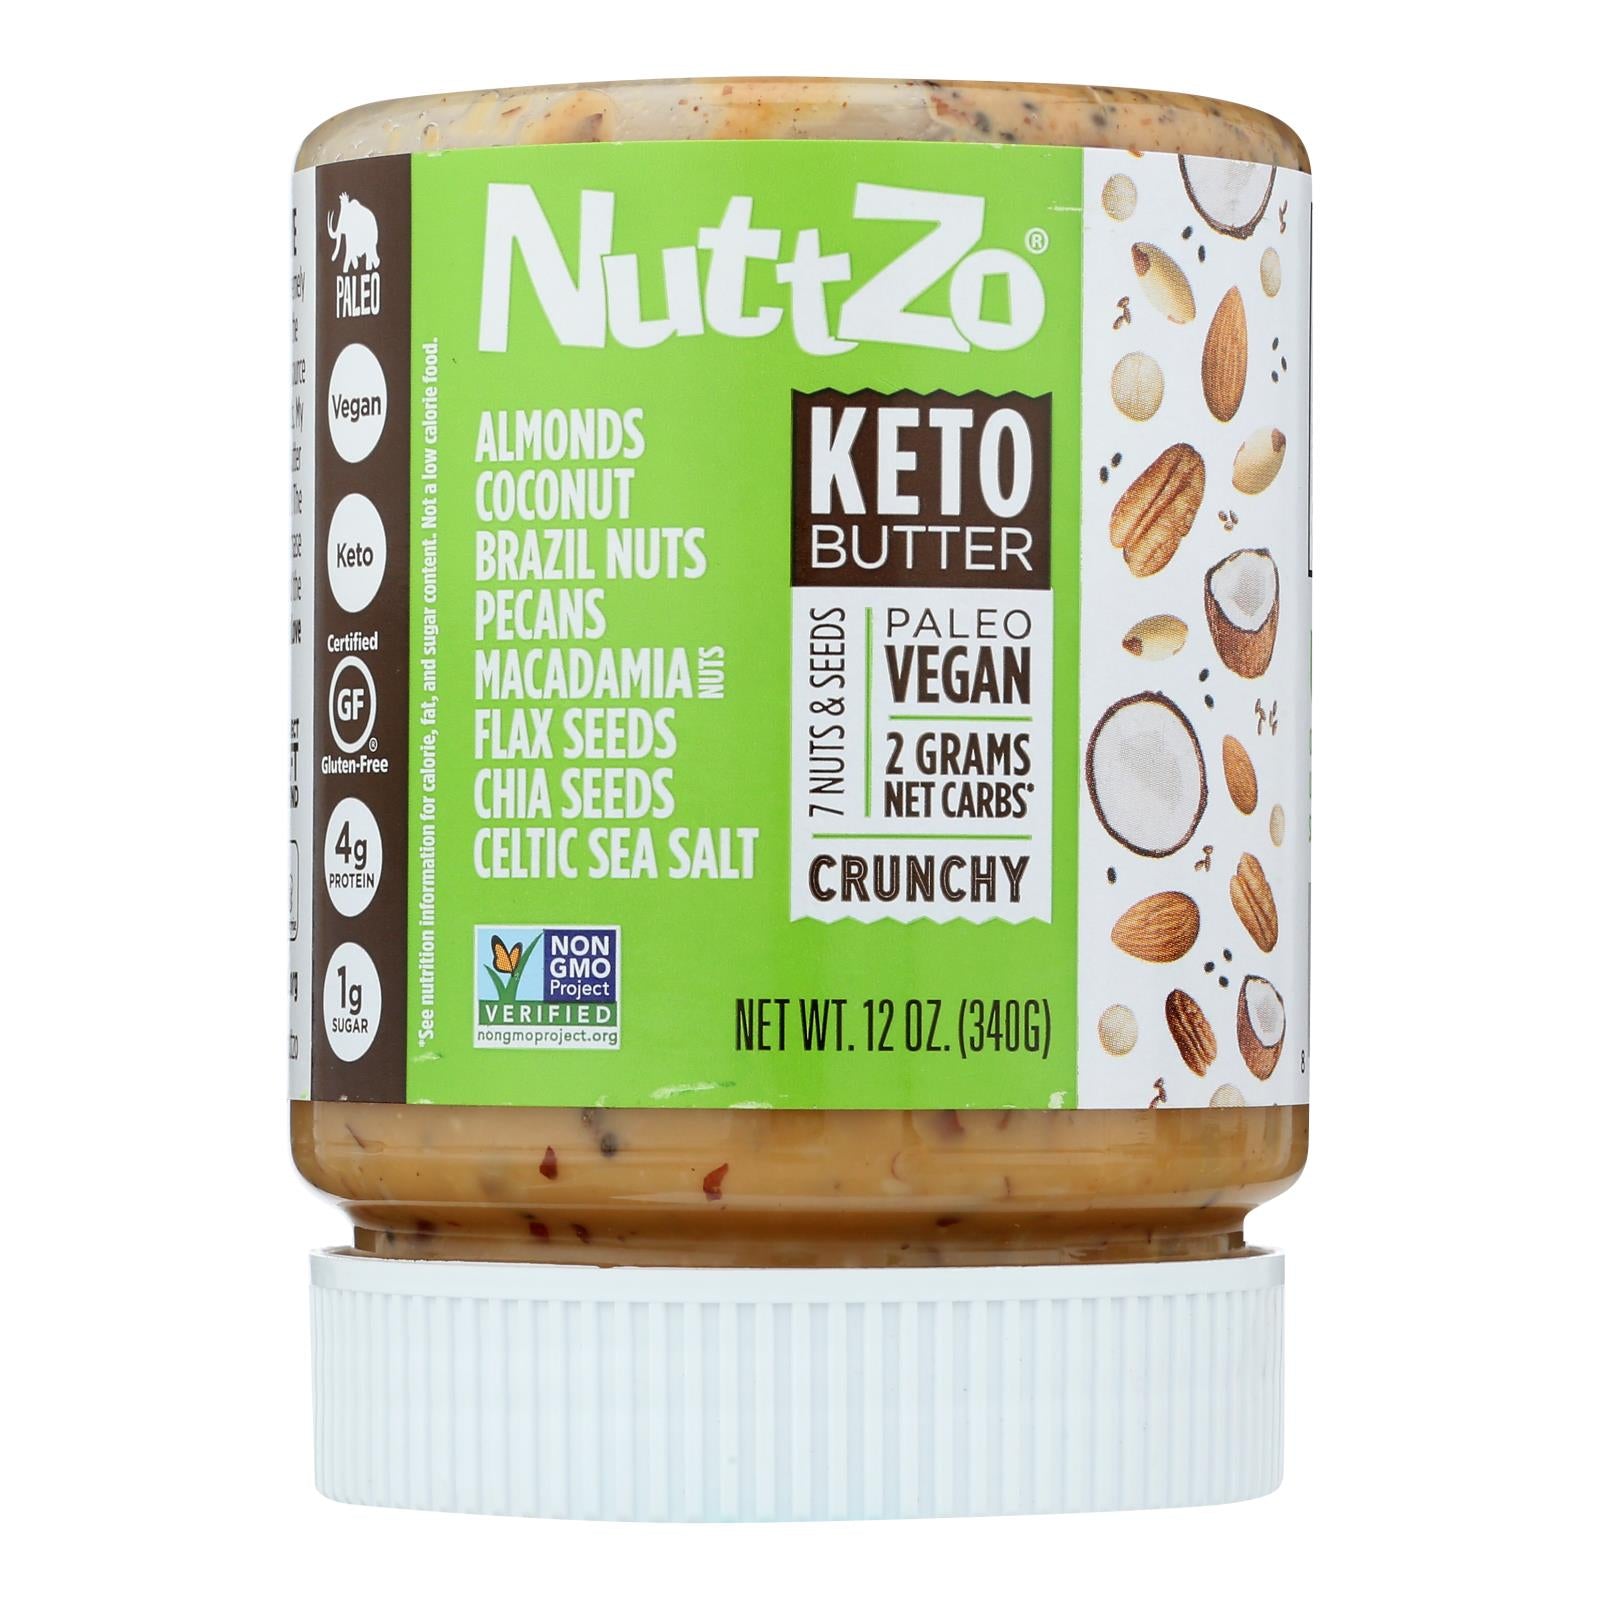 Nuttzo - Nut & Seed Butter Keto - Case Of 6 - 12 Oz - Whole Green Foods